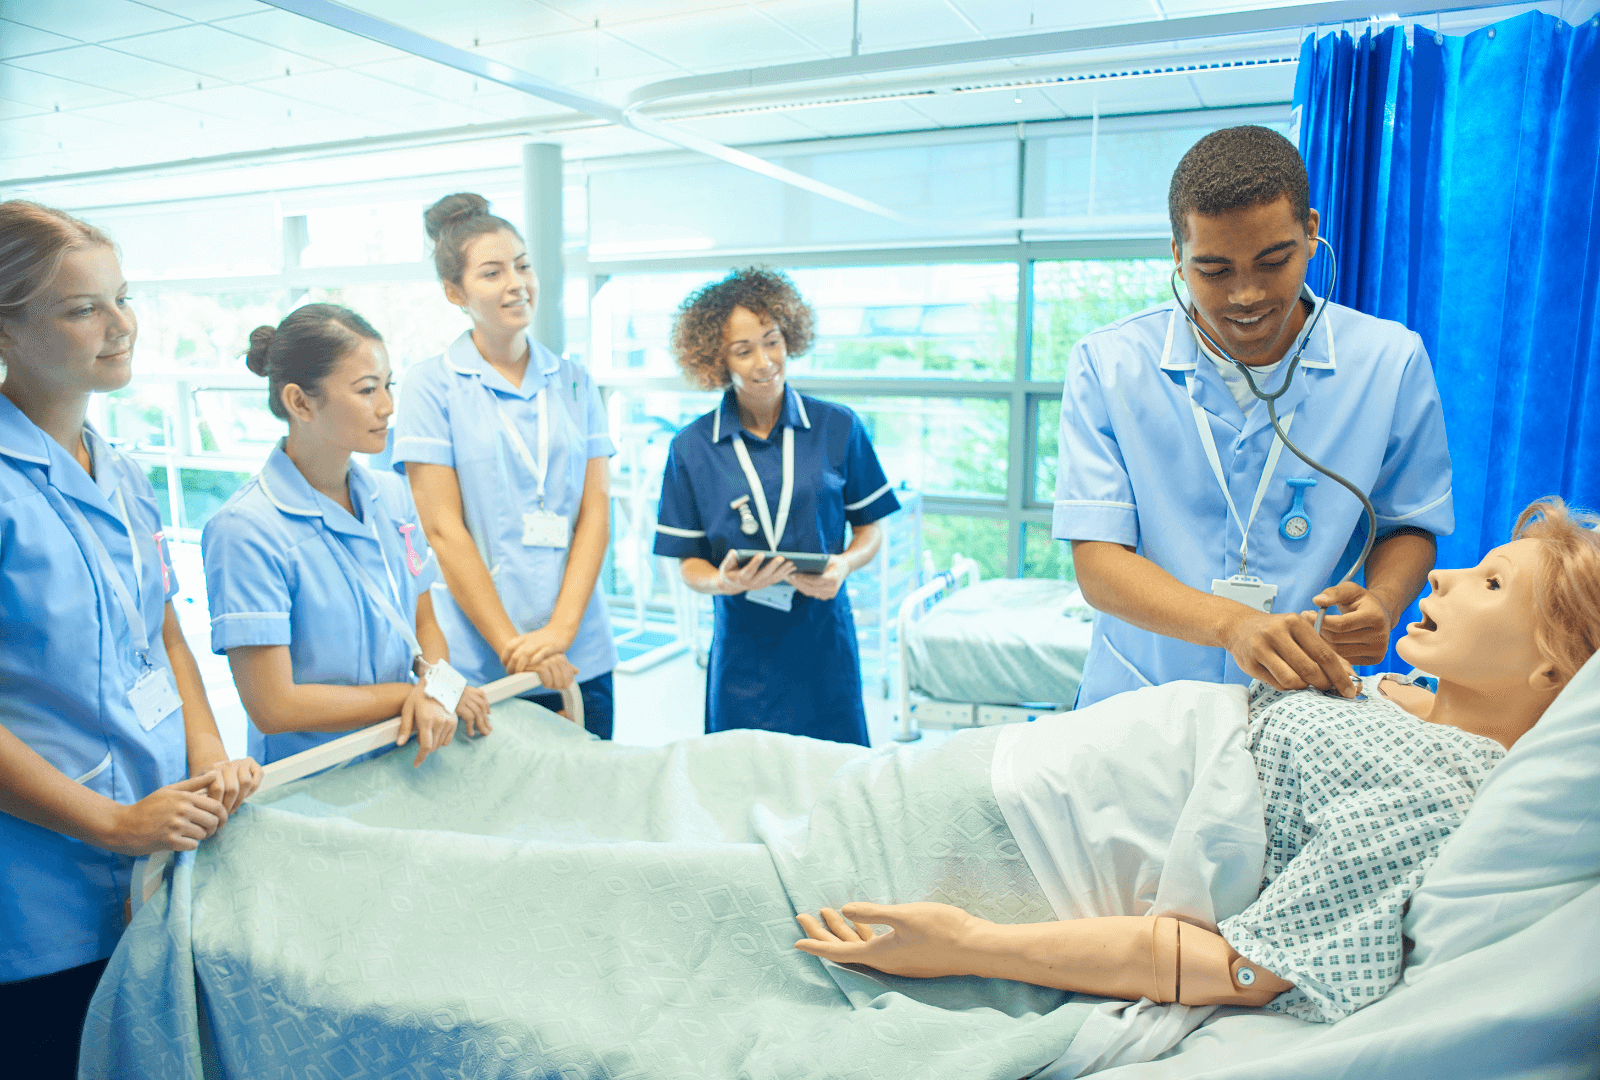 The Use of Standardized Patients vs. Manikins in Medical Training